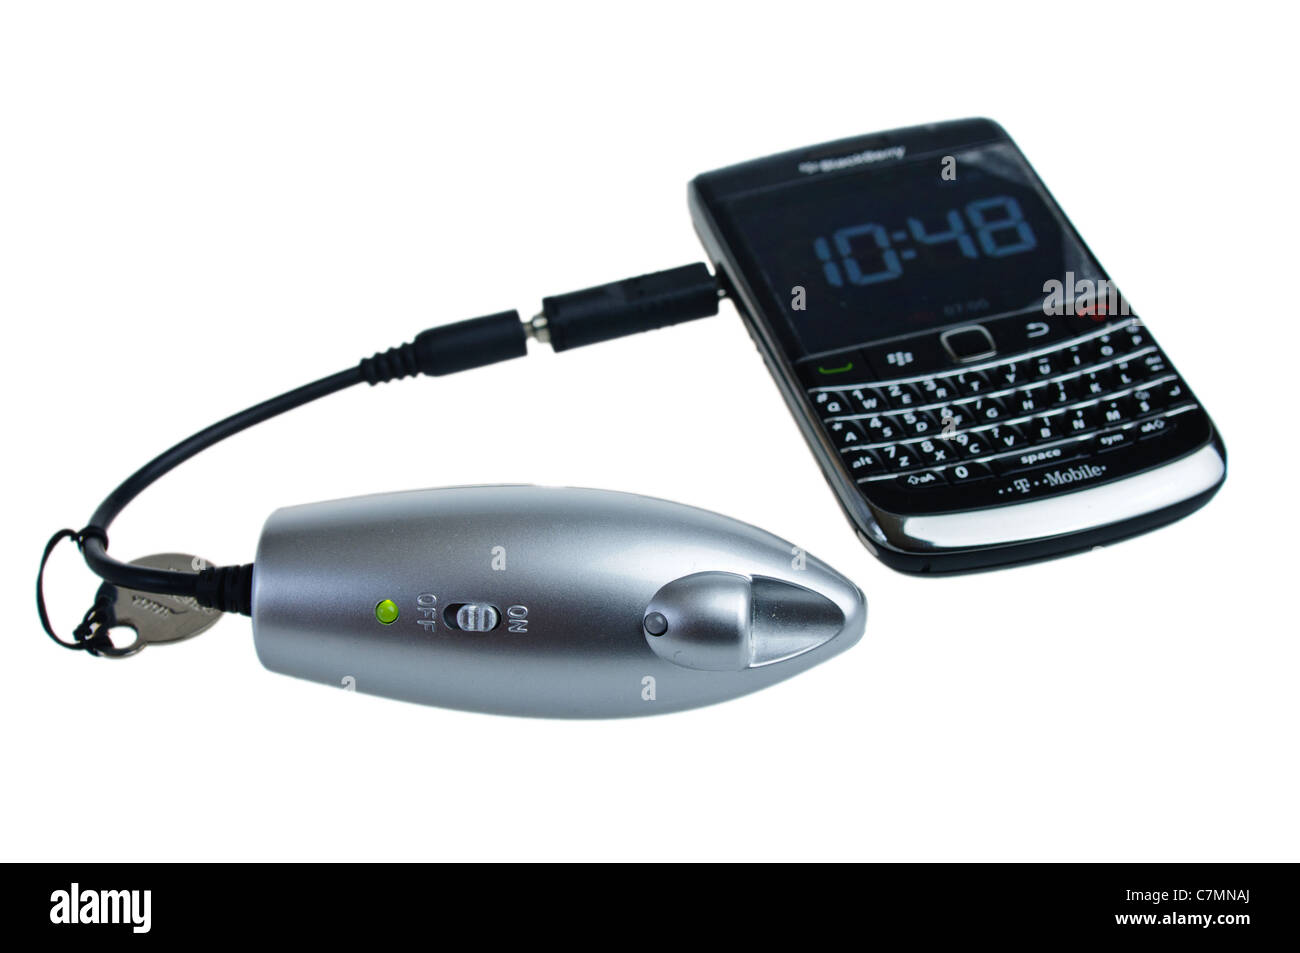 Powermonkey portable charger charging a Blackberry mobile phone Stock Photo